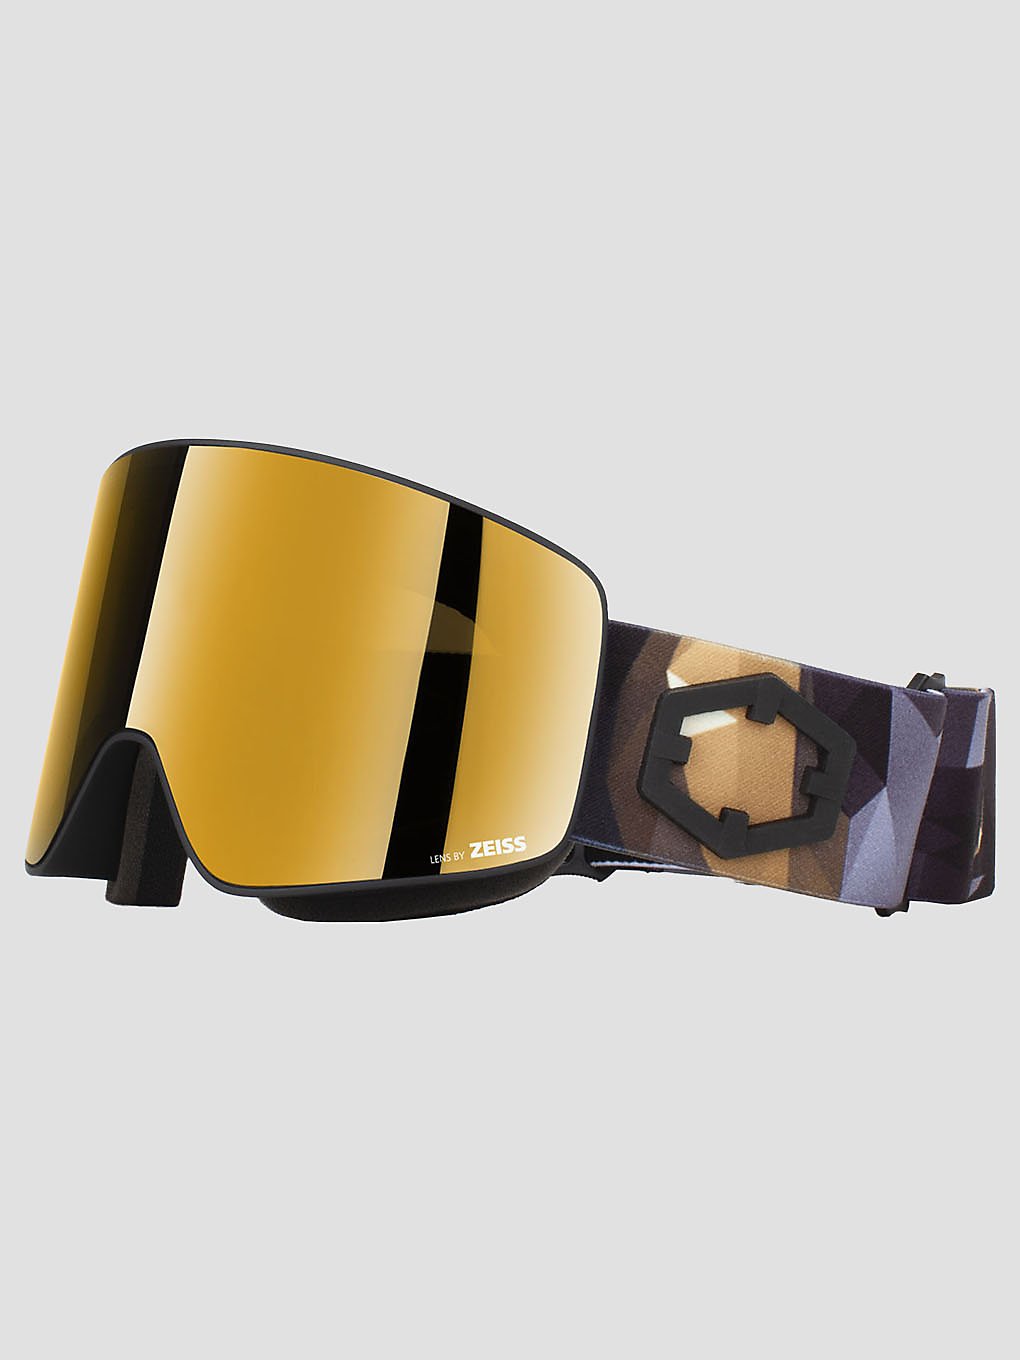 Out Of Void Origami Goggle gold24 mci kaufen